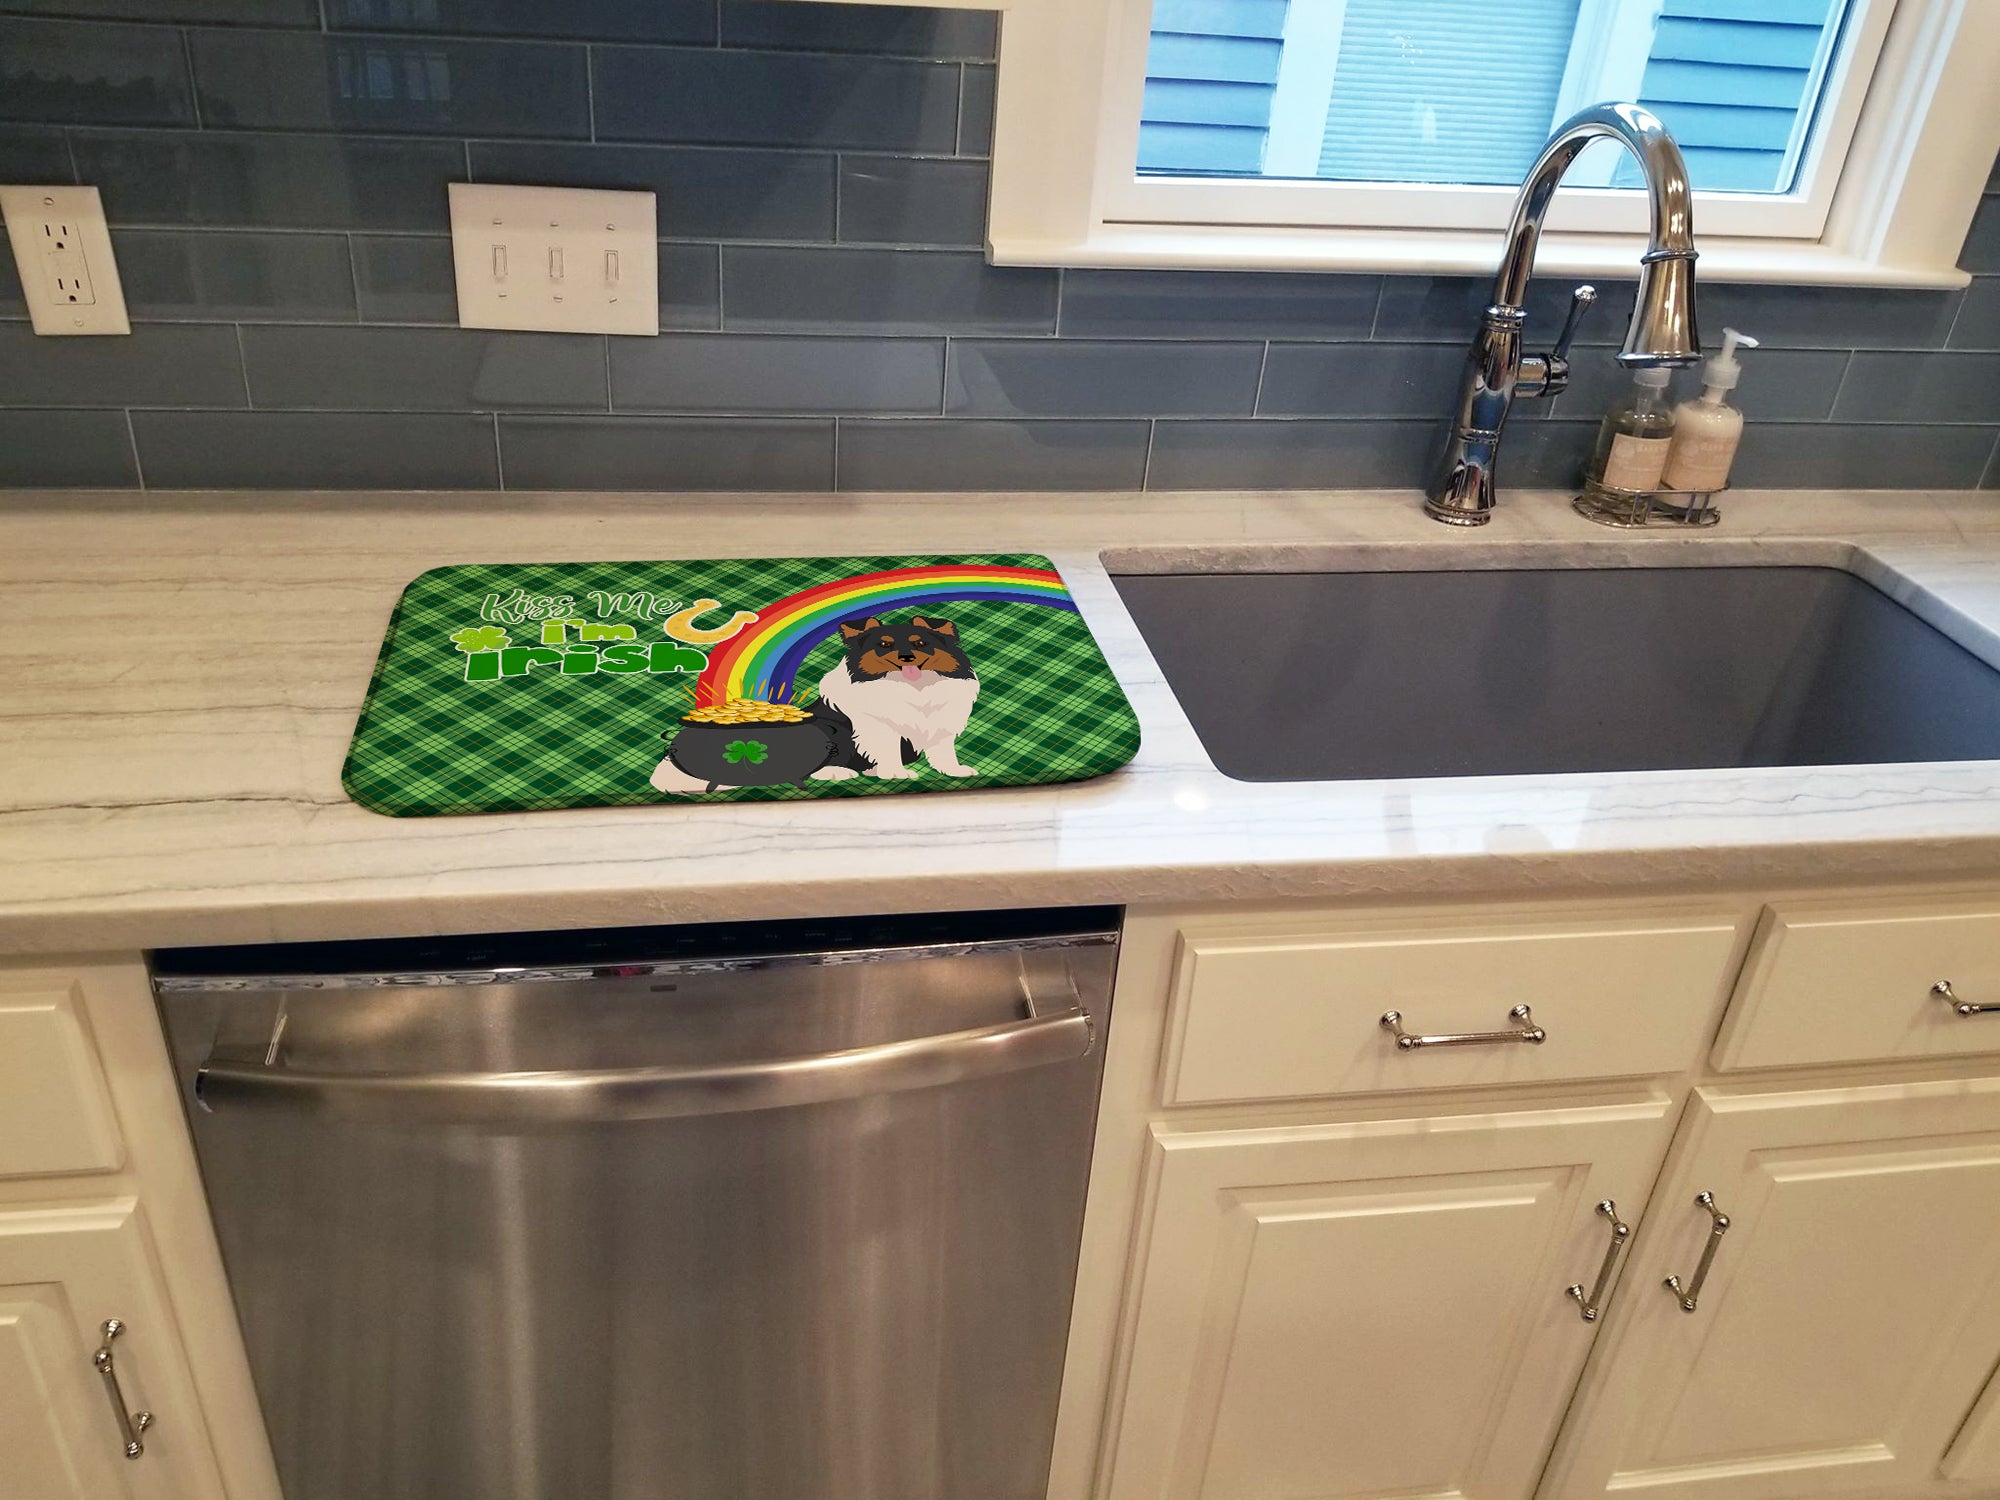 Tricolor Sheltie St. Patrick's Day Dish Drying Mat